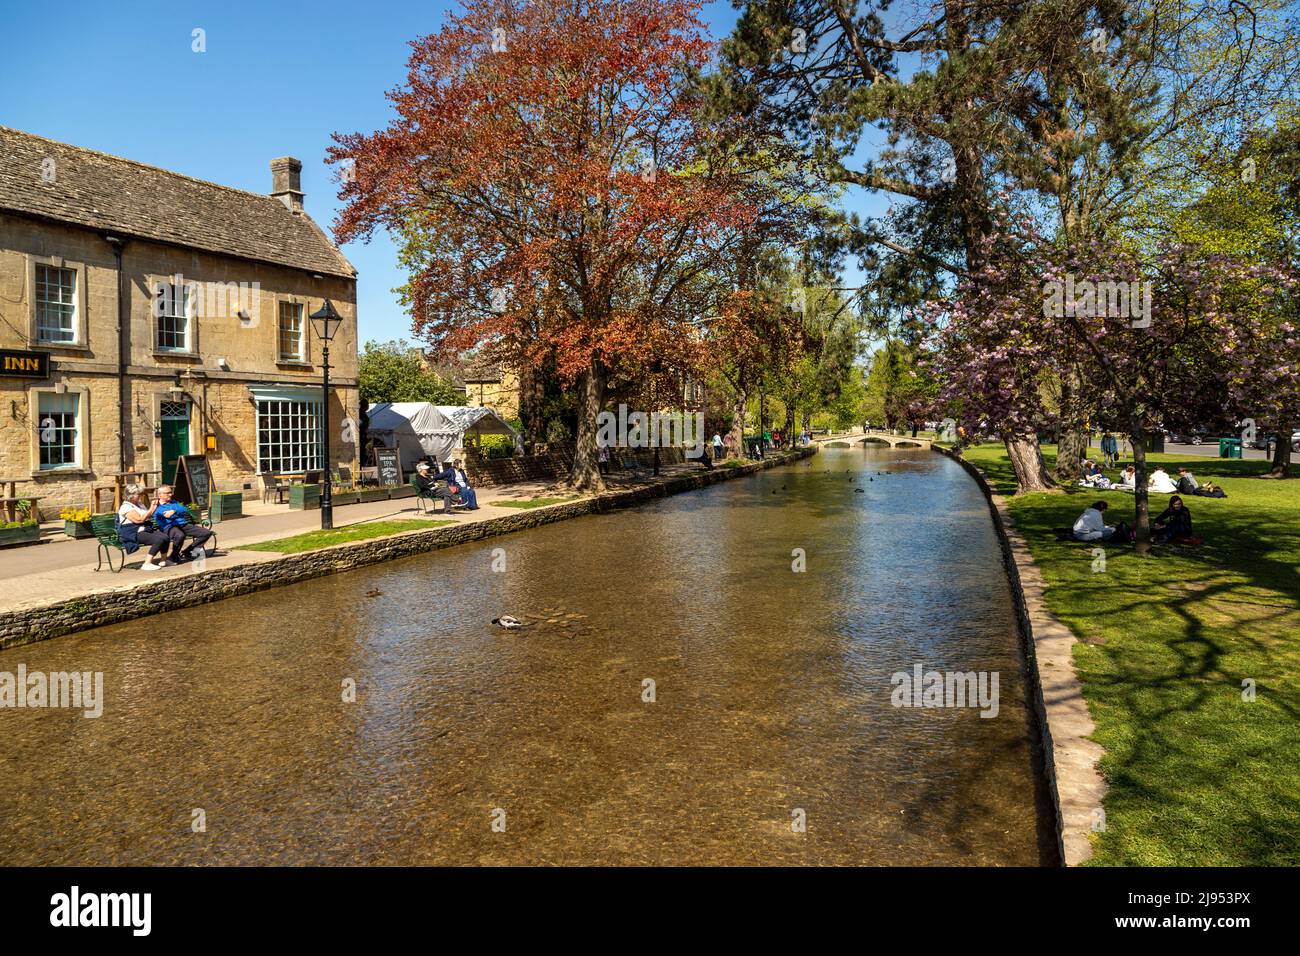 Visitors enjoy a sunny day in Spring in Bourton-on-the-Water along the river Windrush, a popular Cotswolds destination, Gloucestershire, England, UK. Stock Photo